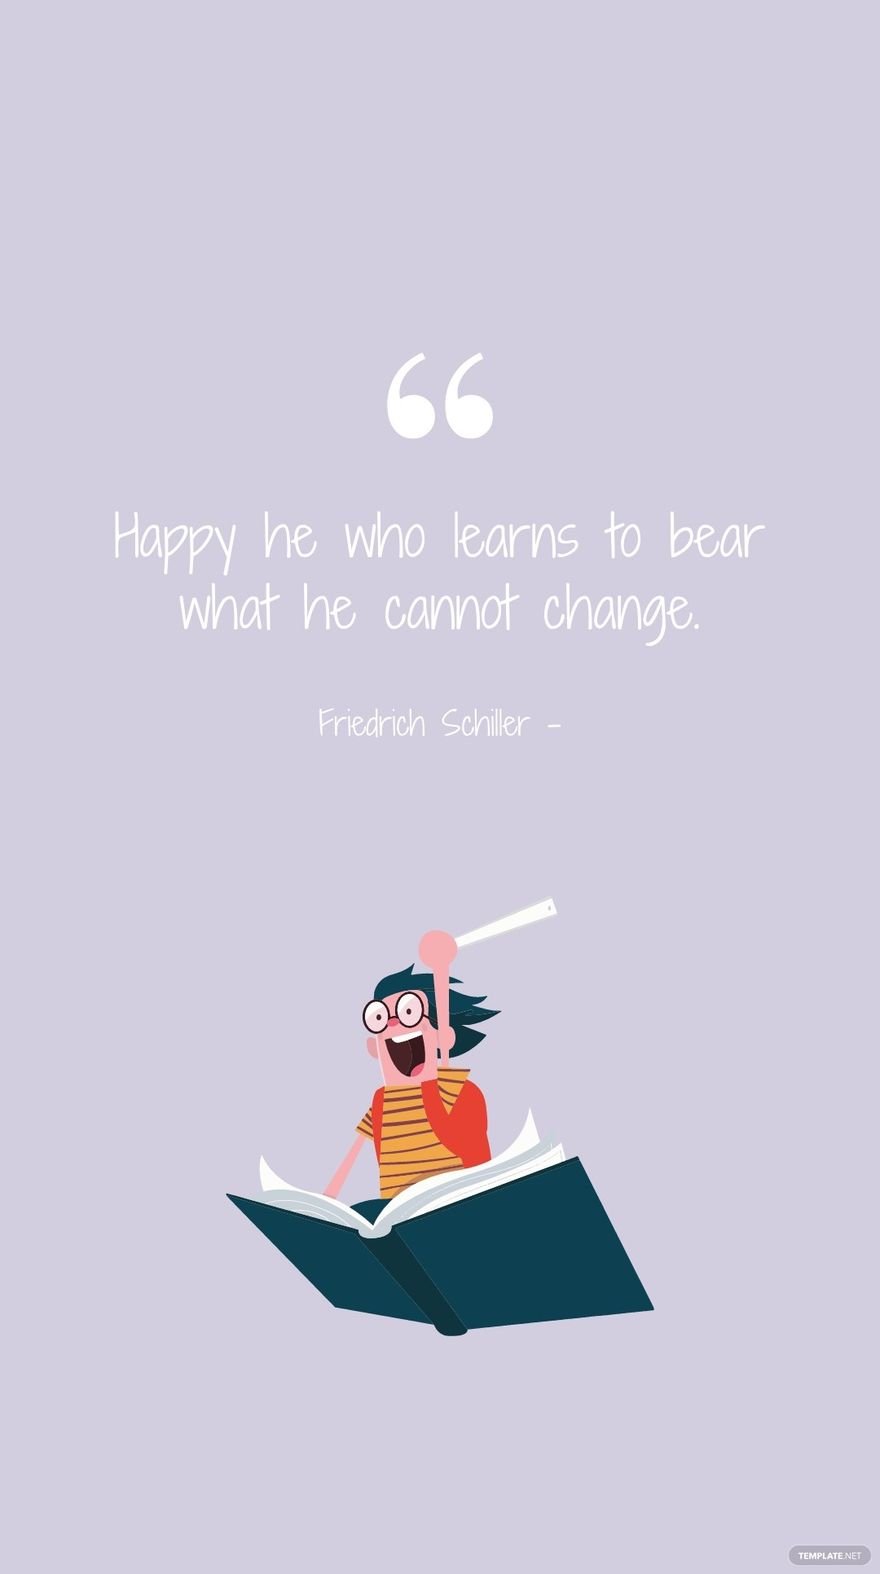 Friedrich Schiller - Happy he who learns to bear what he cannot change.